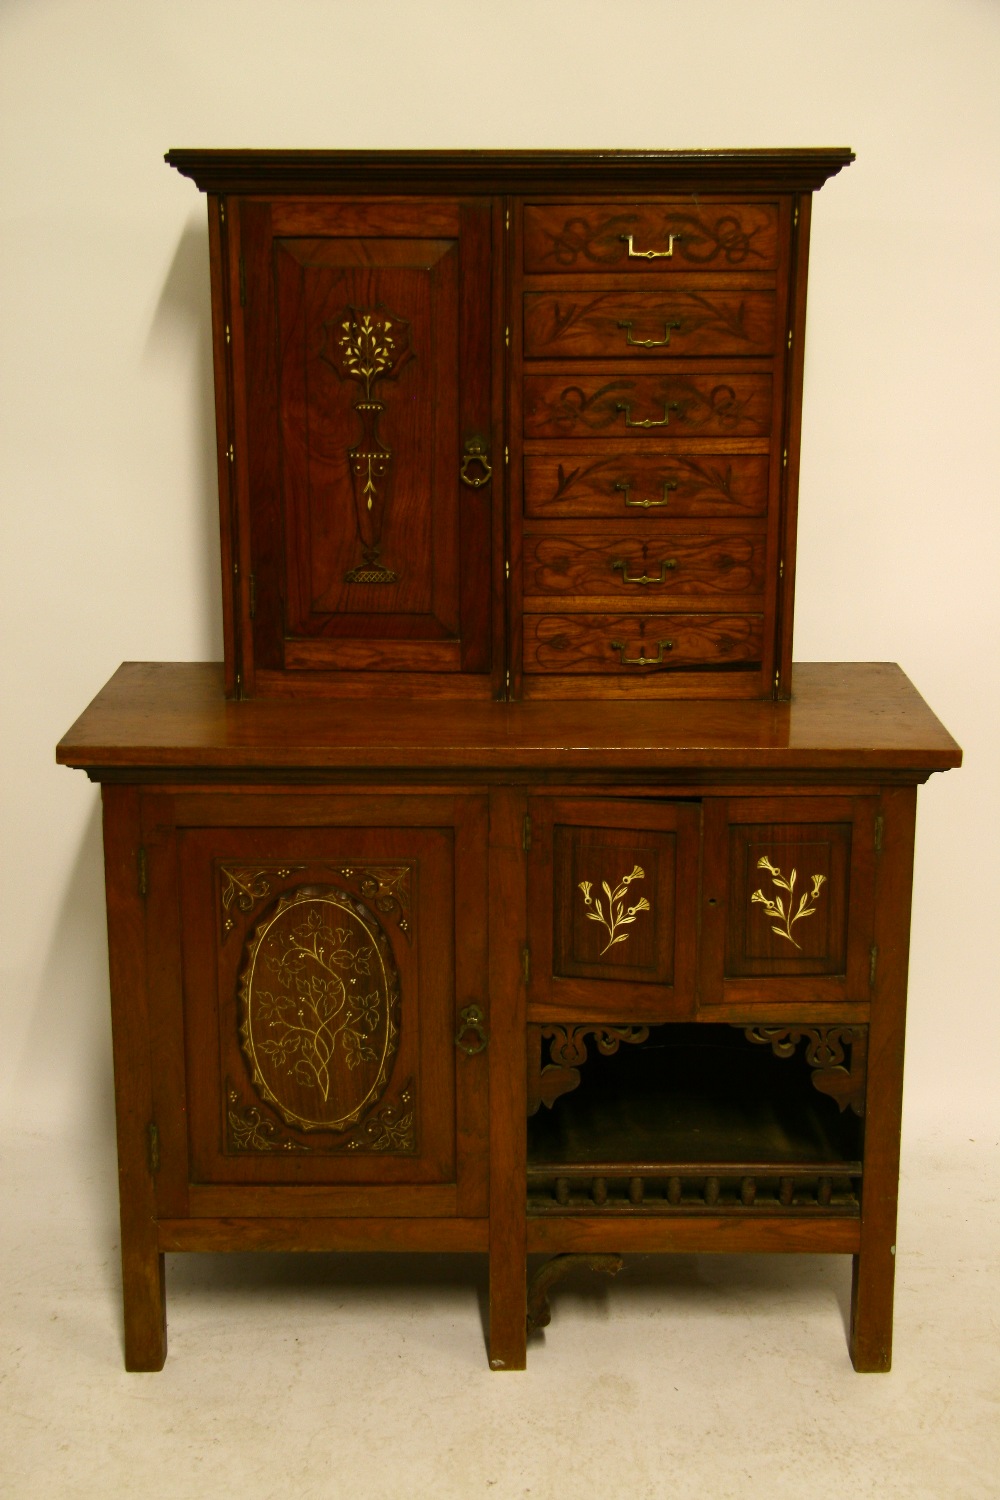 A 19th century continental walnut cabinet with bone-inlaid floral decoration, the upper part with